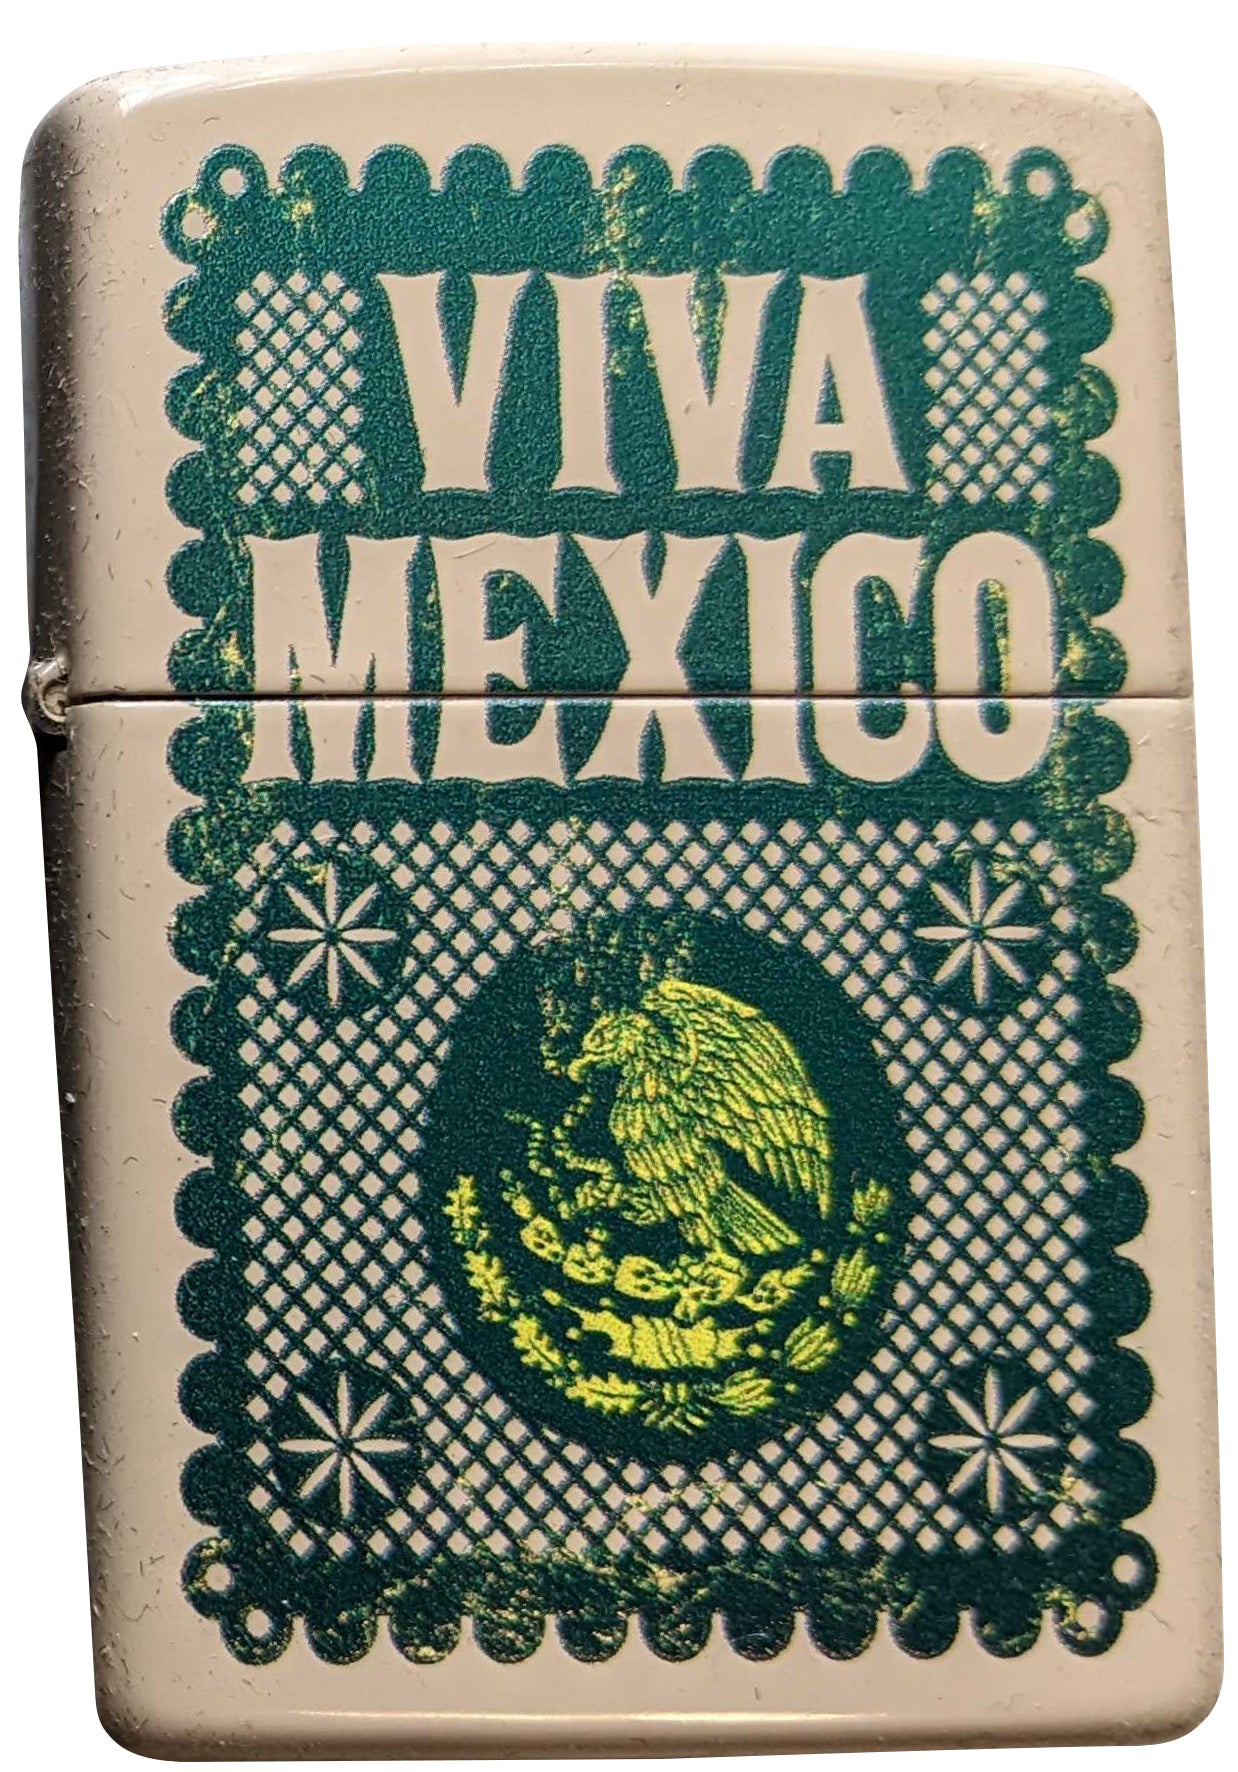 Viva Mexico Cry of Dolores - Flat Sand Zippo Lighter